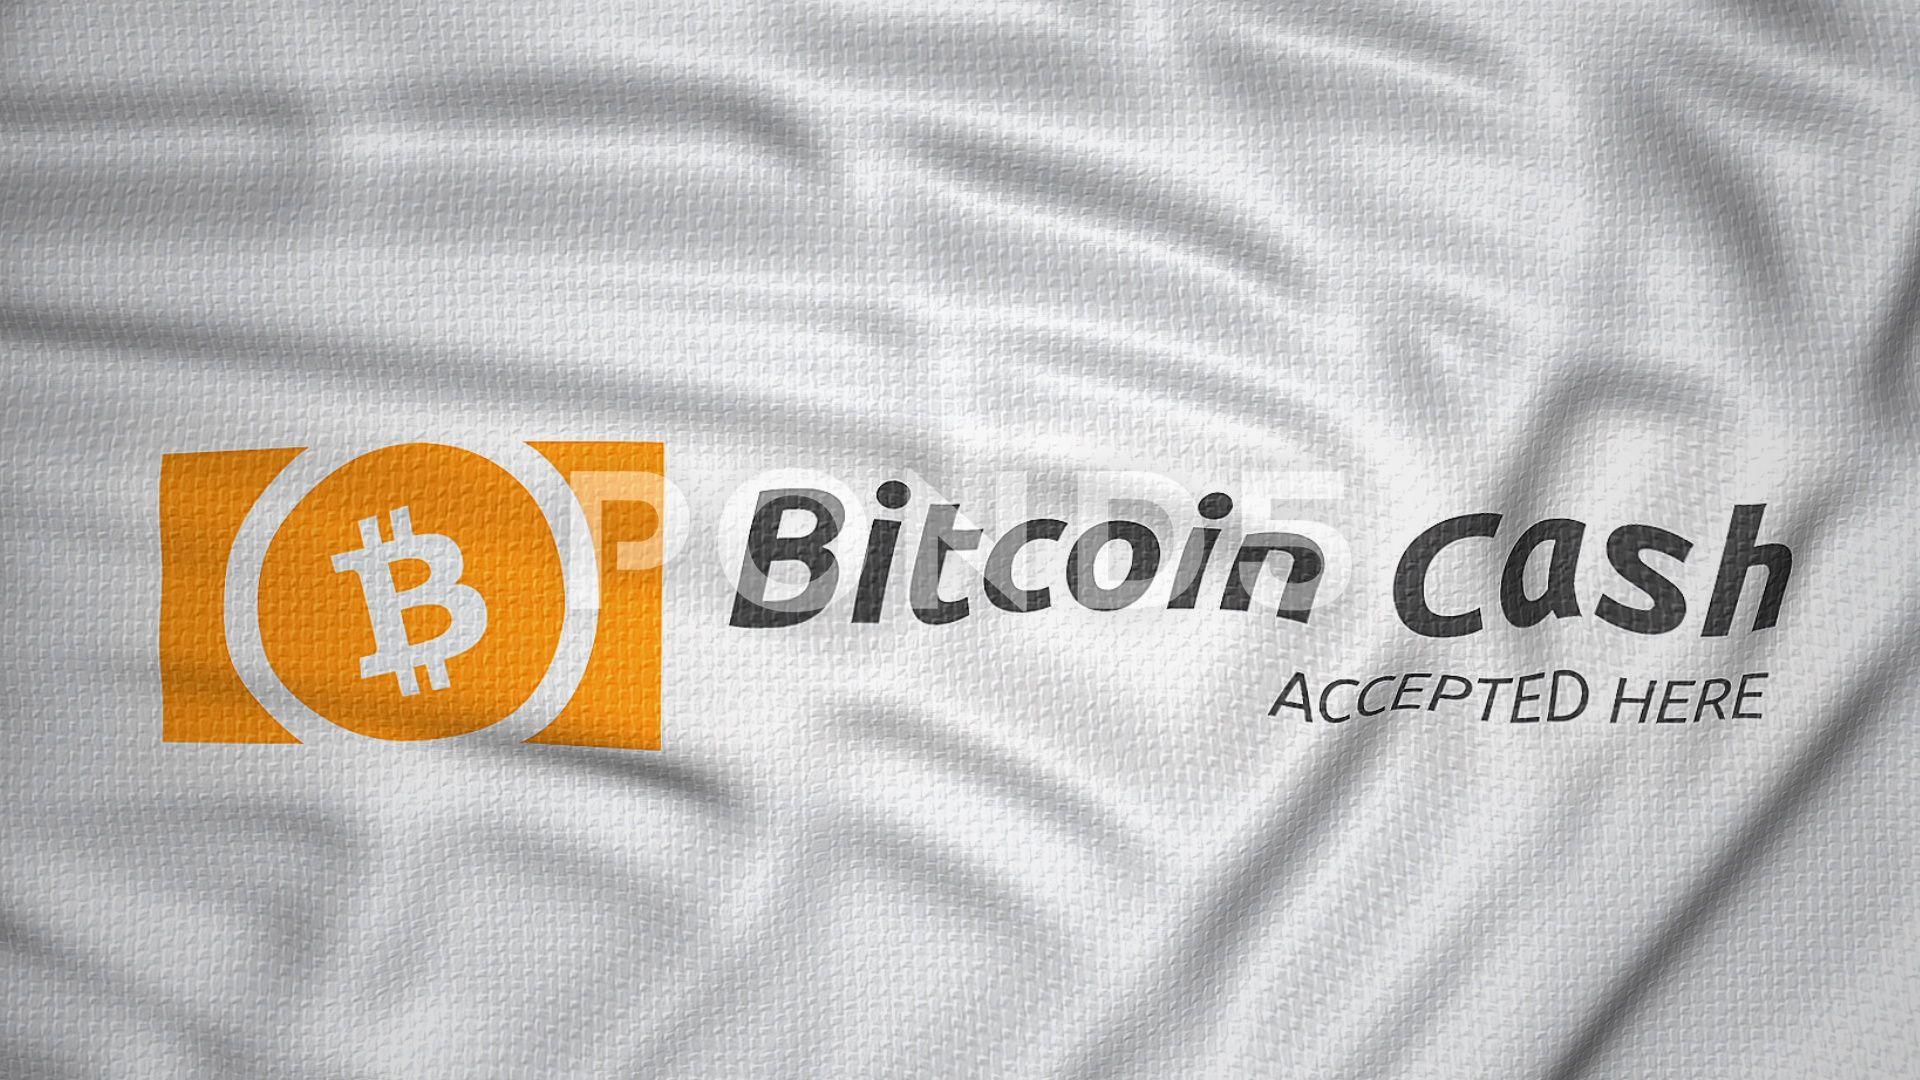 Cash Accepted Logo - Bitcoin cash accepted here, banner logo flag waving Footage